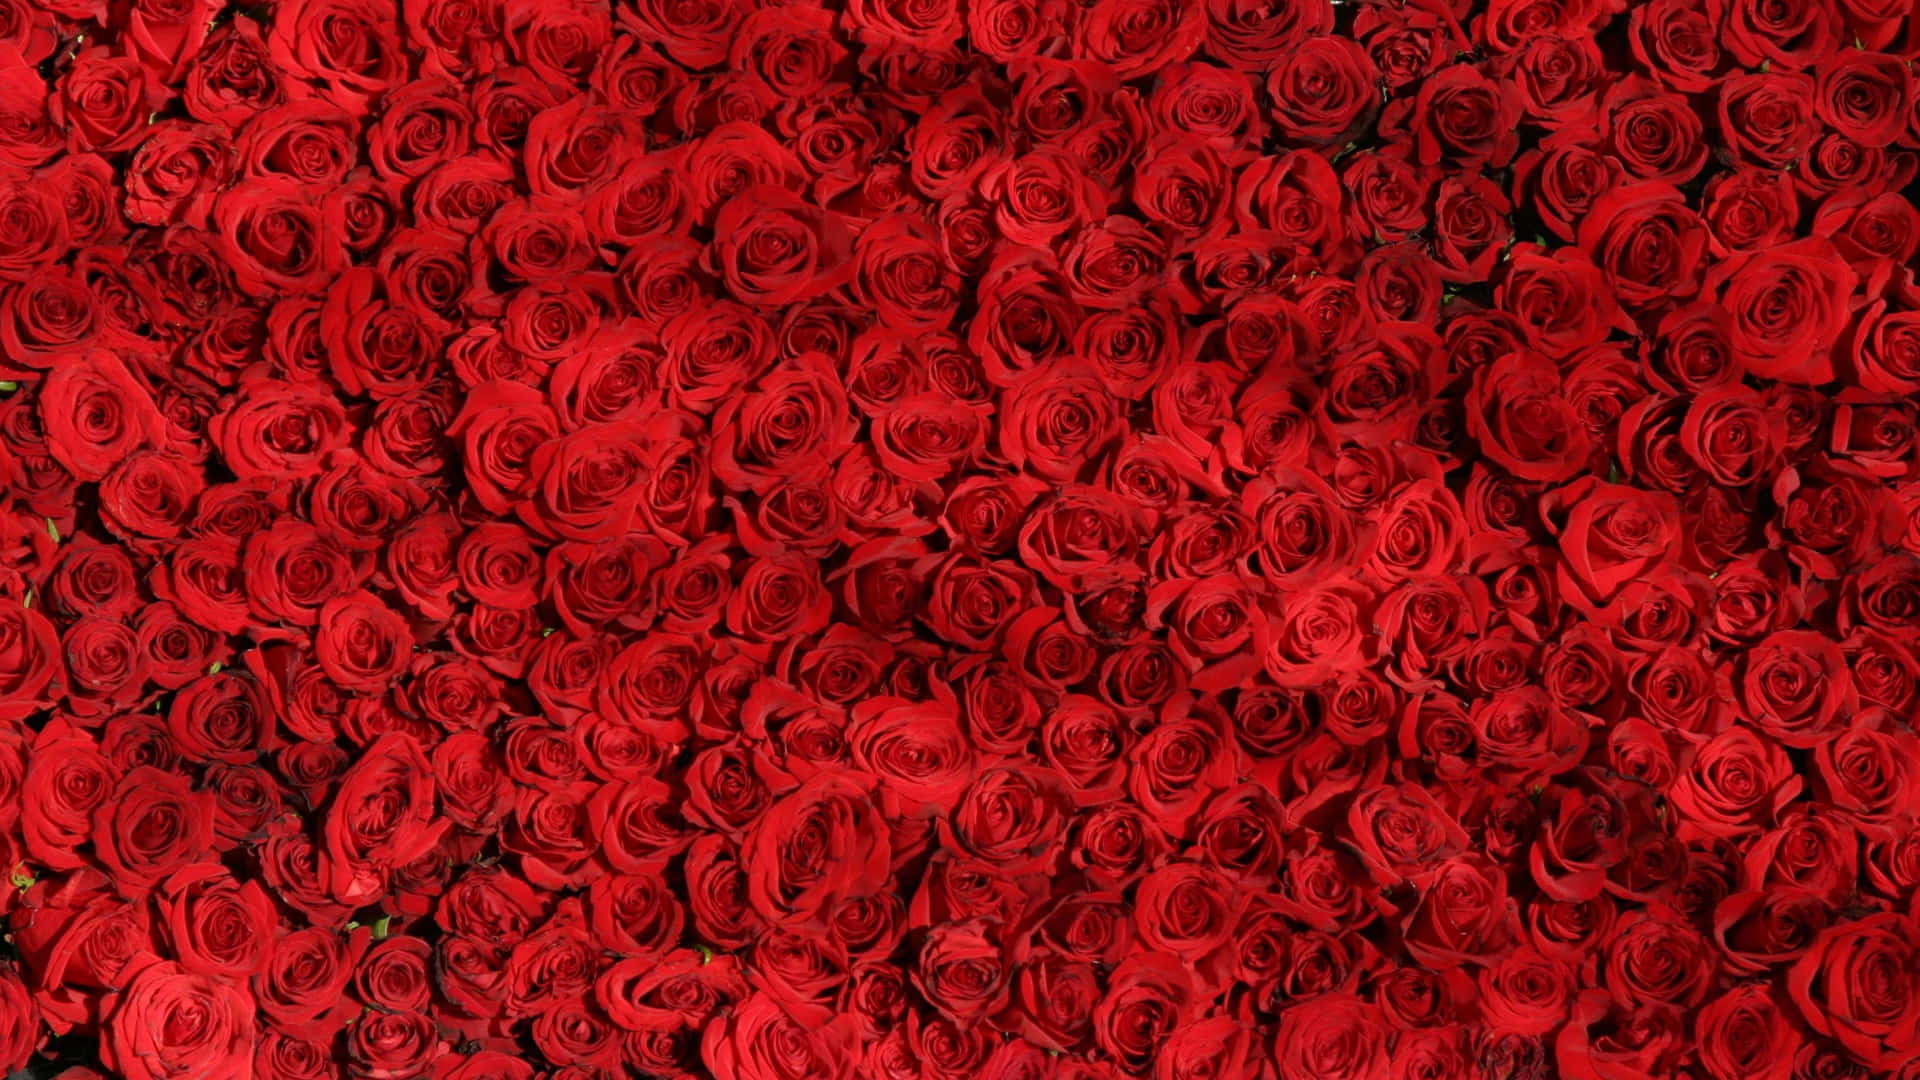 1440p Compressed Red Roses Background